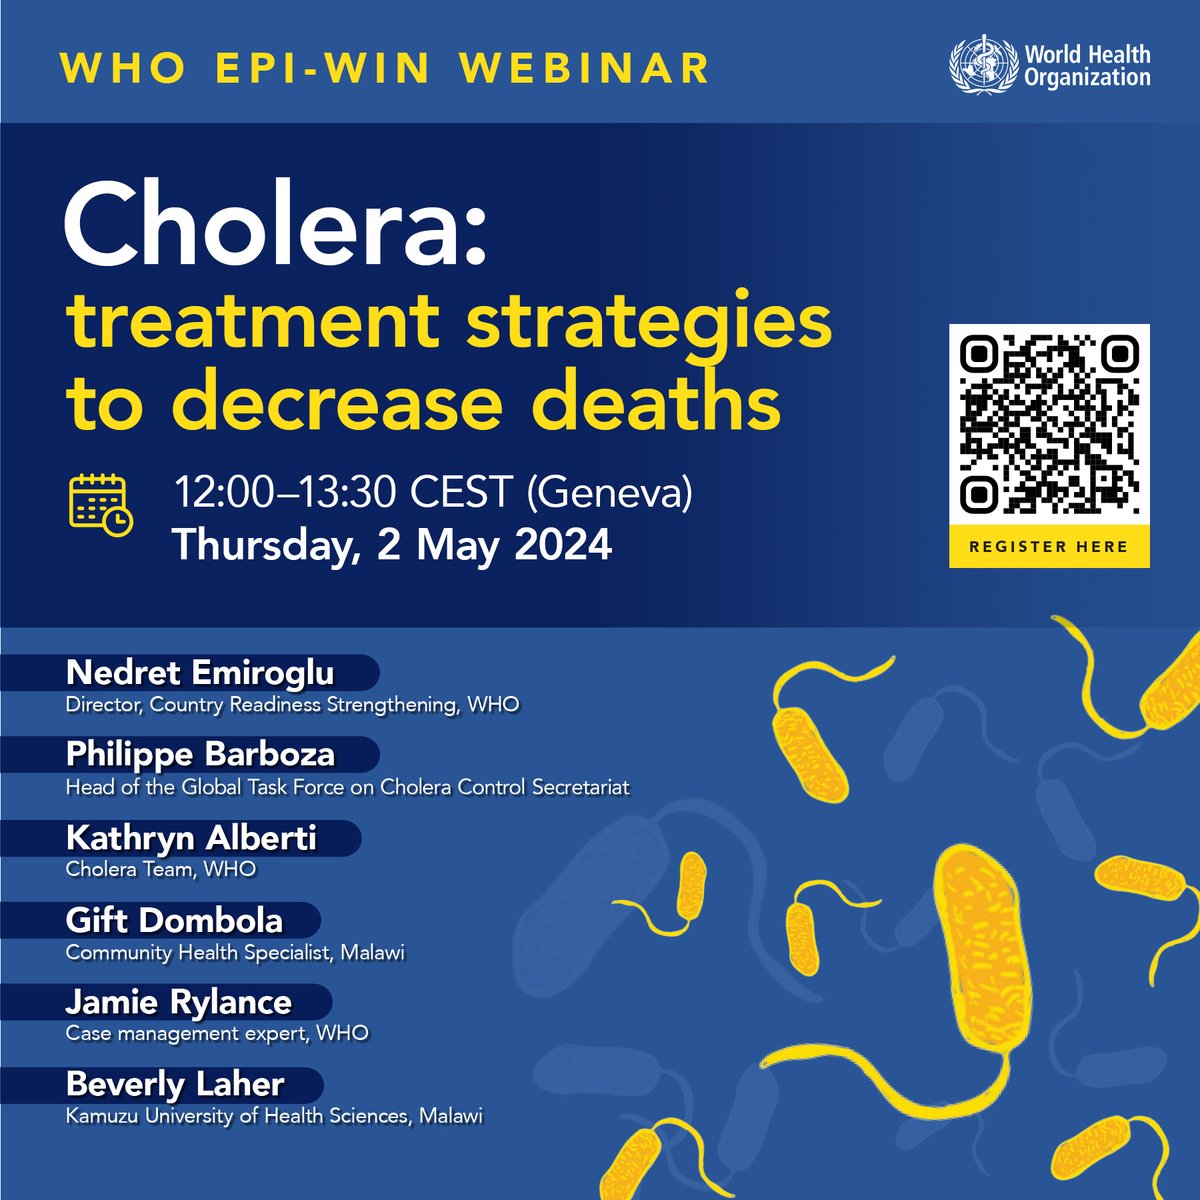 Do join @WHO #EPIWIN webinar 'Cholera: treatment strategies to decrease deaths', Thu 2 May 2024 12.00 CEST. Though preventable & treatable, there's been a surge in cholera outbreaks. This discusses practical lessons learned in the last 2 years. Register: shorturl.at/sQV17